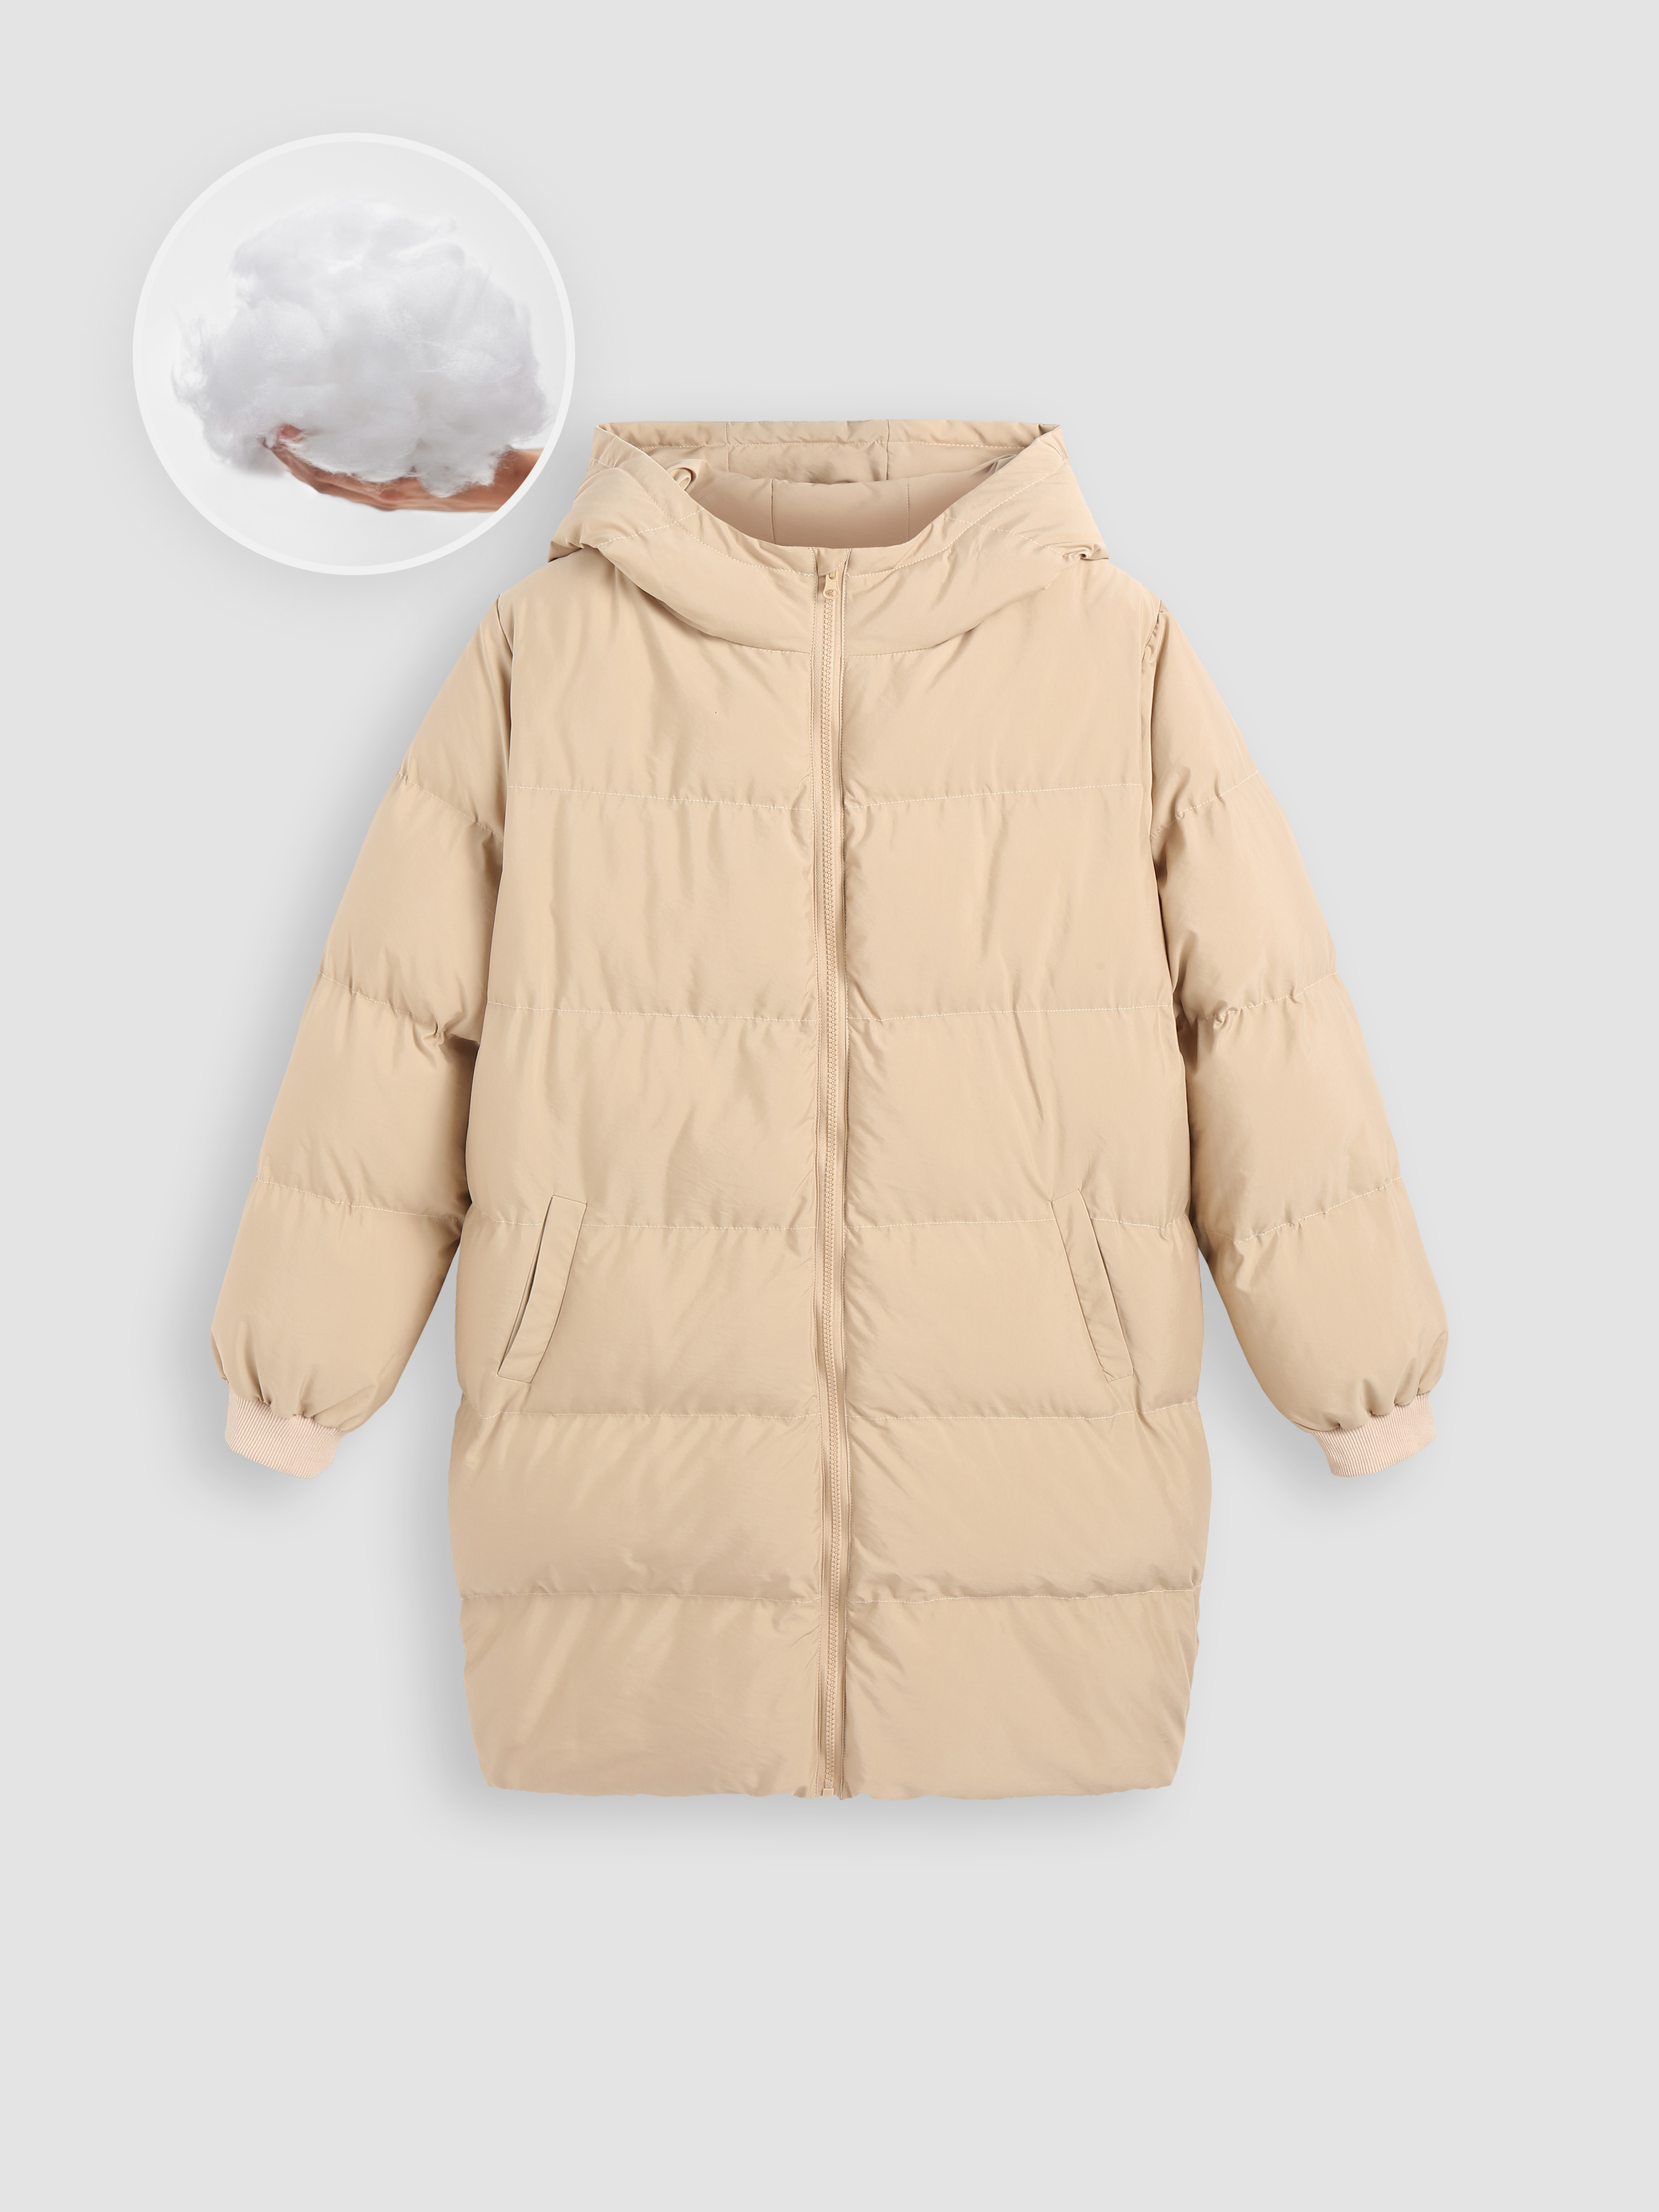 Hooded Solid Pocket Puffer Coat for Daily Casual